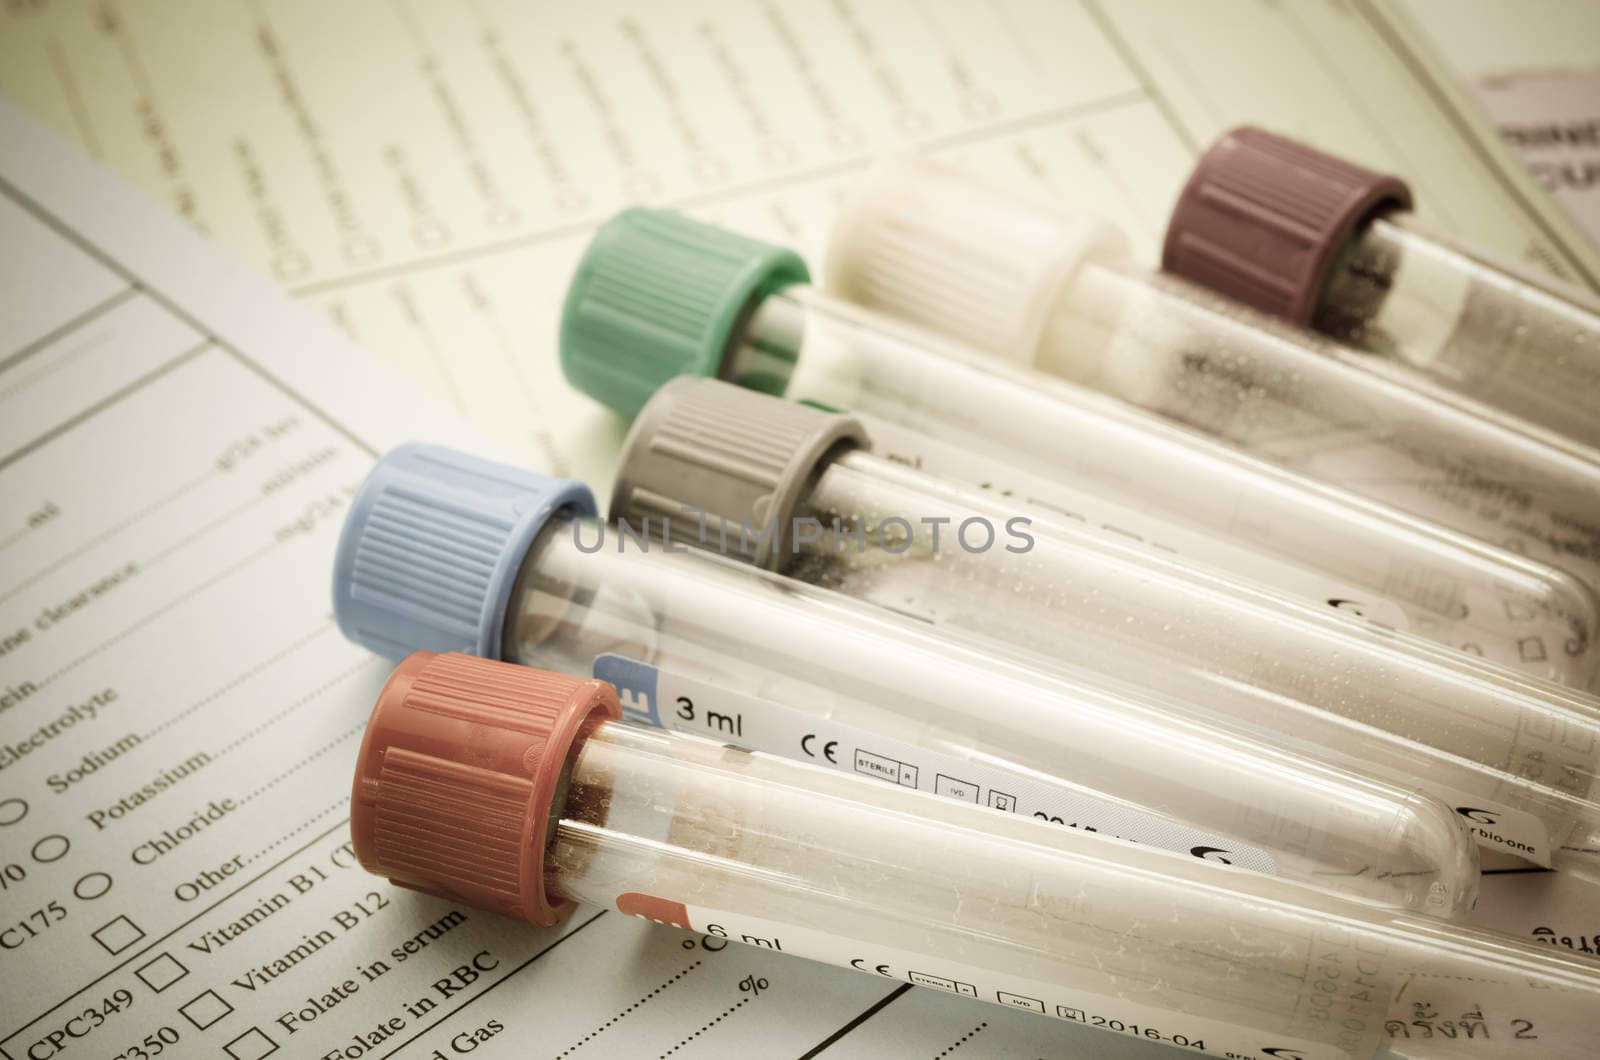 The old blood tubes for test on reqest form medical testing in Laboratory.